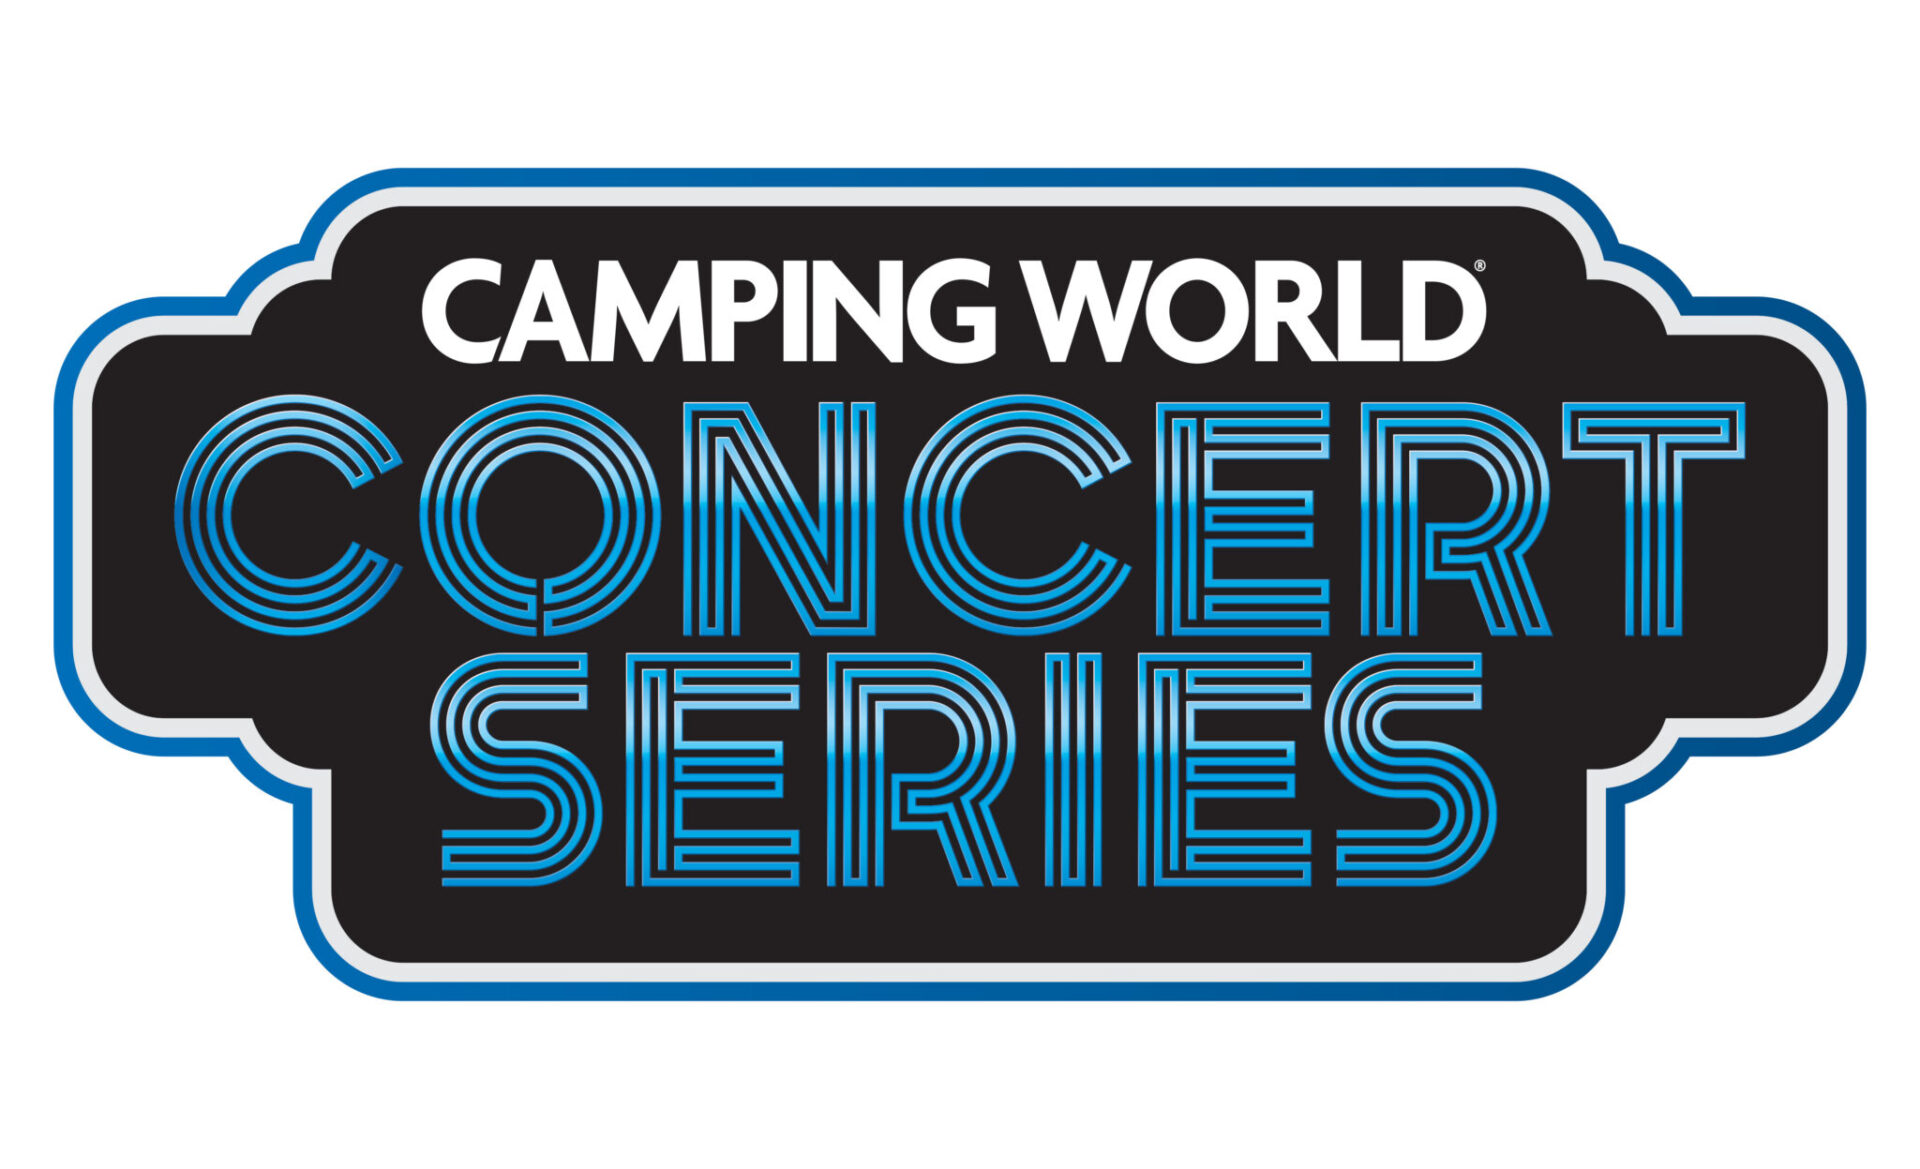 Camping World Offers Free Concert Series Featuring Alabama, Lady A, and More